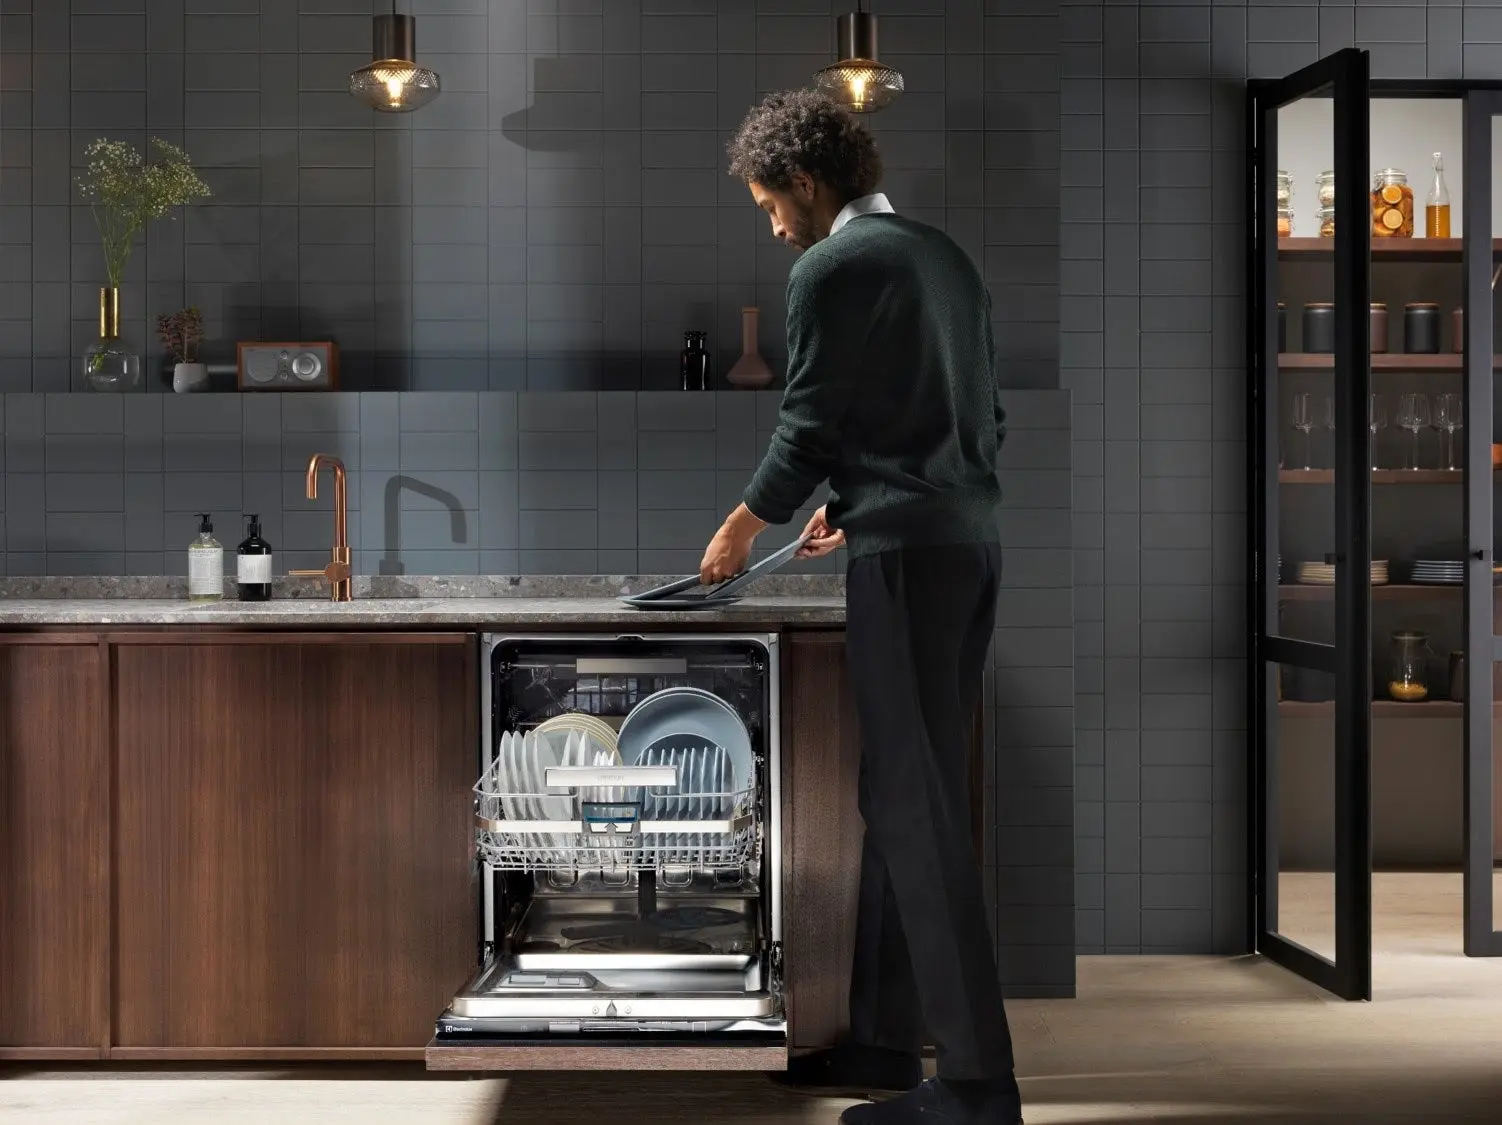 A model poses with an Electrolux dishwasher equipped with sustainability features.